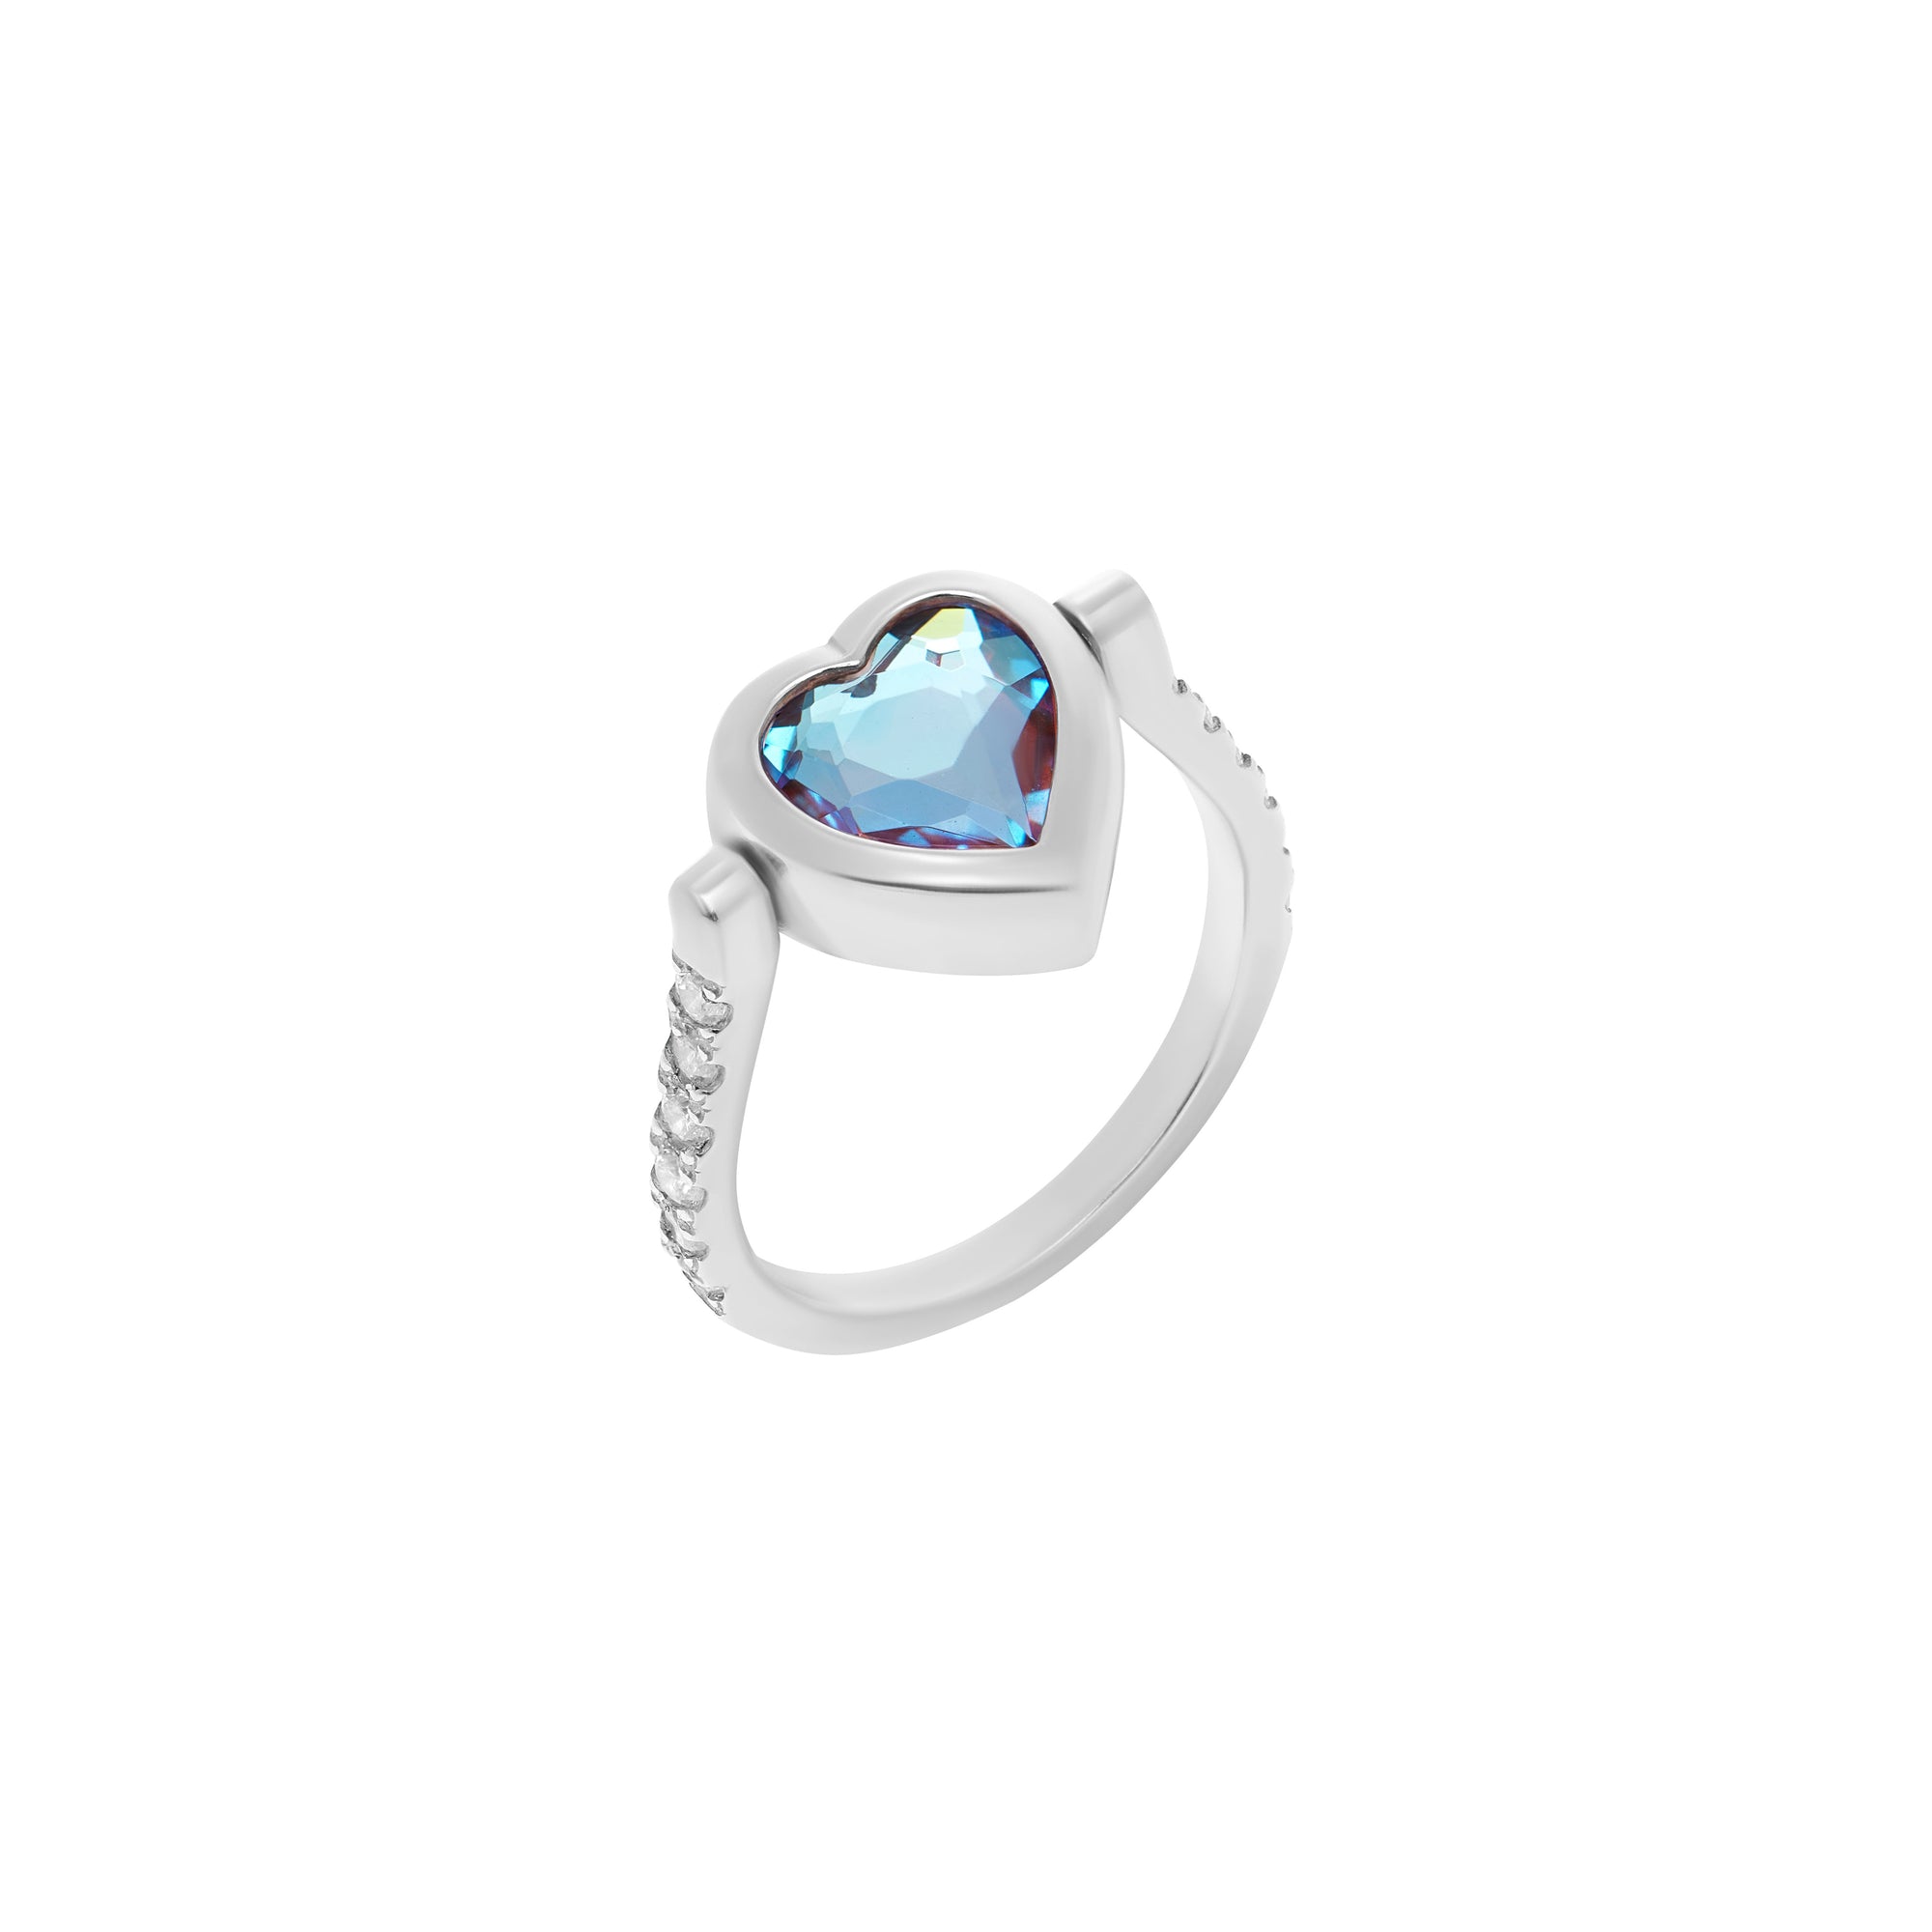 Ring 'Blue Mystic Eddy Heart' – You Can Do It